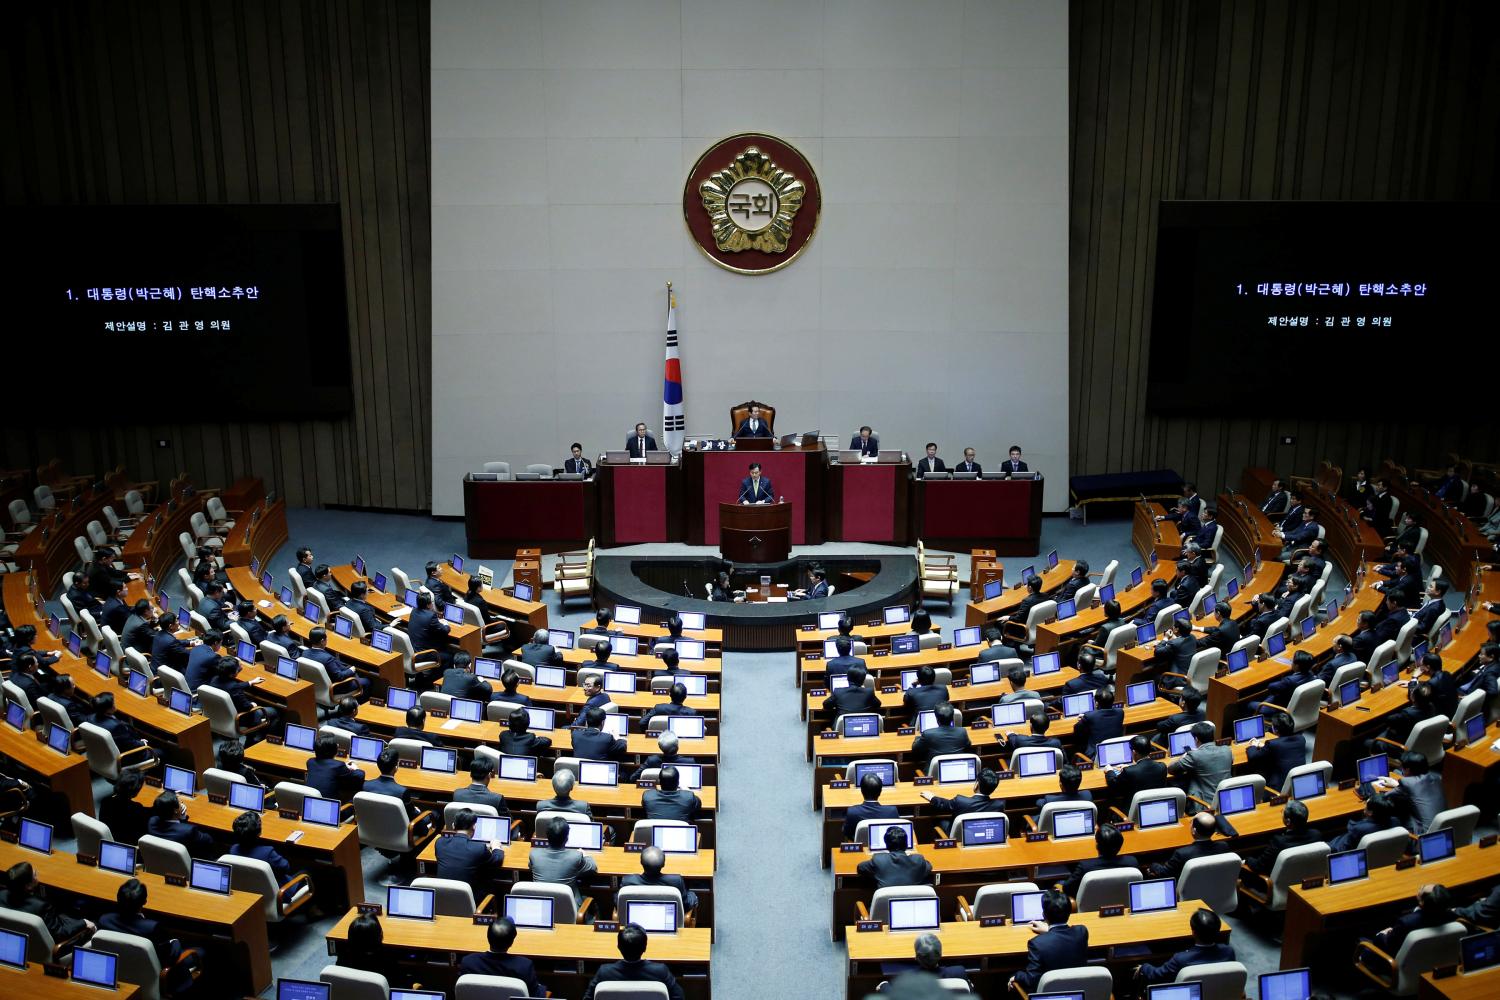 Lawmakers attend a plenary session to vote on the impeachment bill of President Park Geun-hye at the National Assembly in Seoul, South Korea, December 9, 2016. REUTERS/Kim Hong-Ji - RTSVCEL